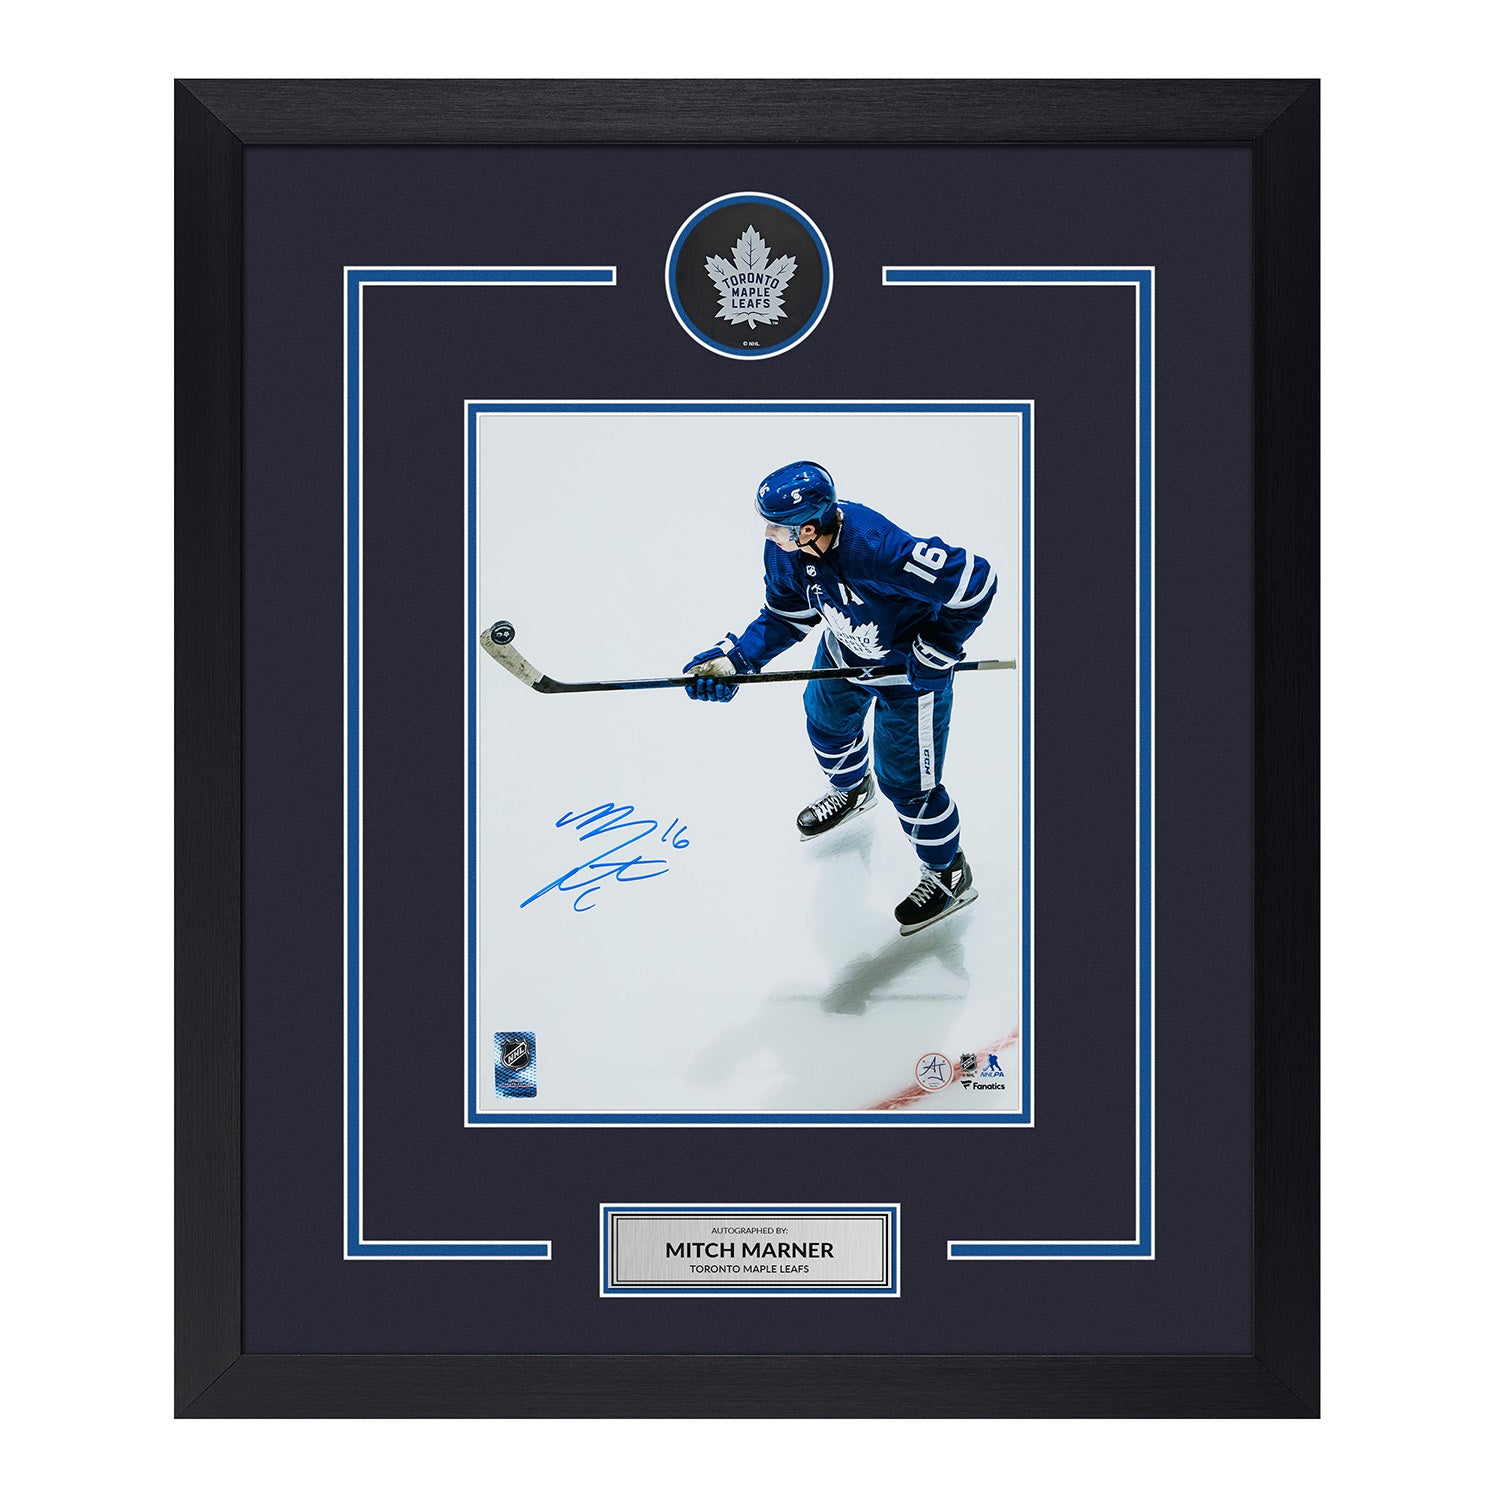 Doug Gilmour Signed Maple Leafs White Jersey Action 8x10 Photo